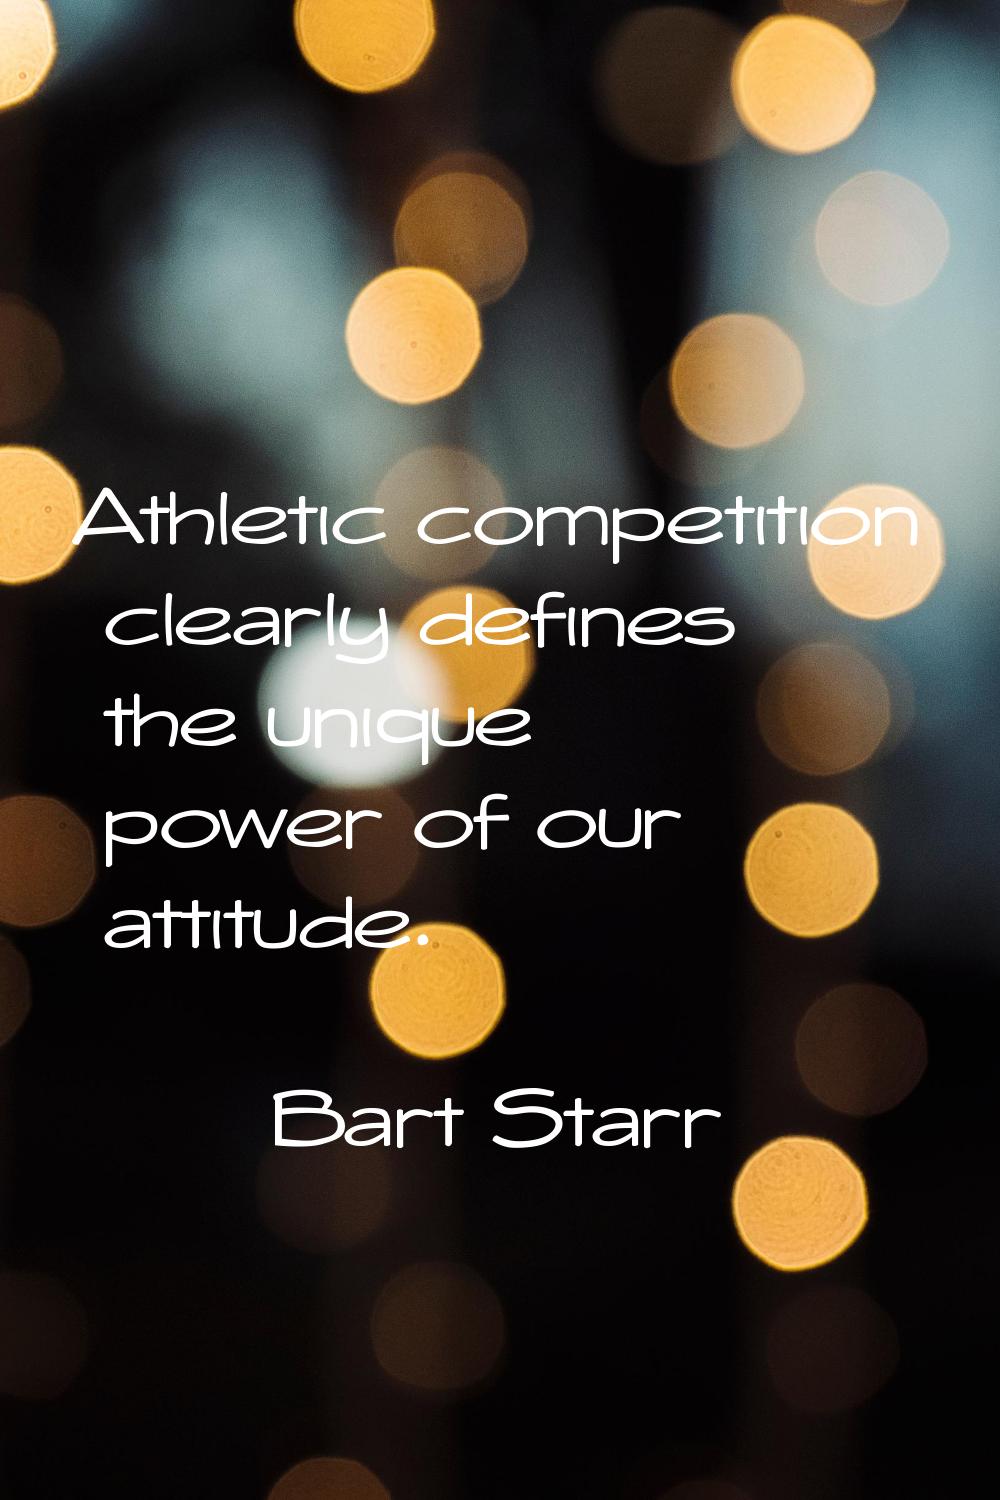 Athletic competition clearly defines the unique power of our attitude.